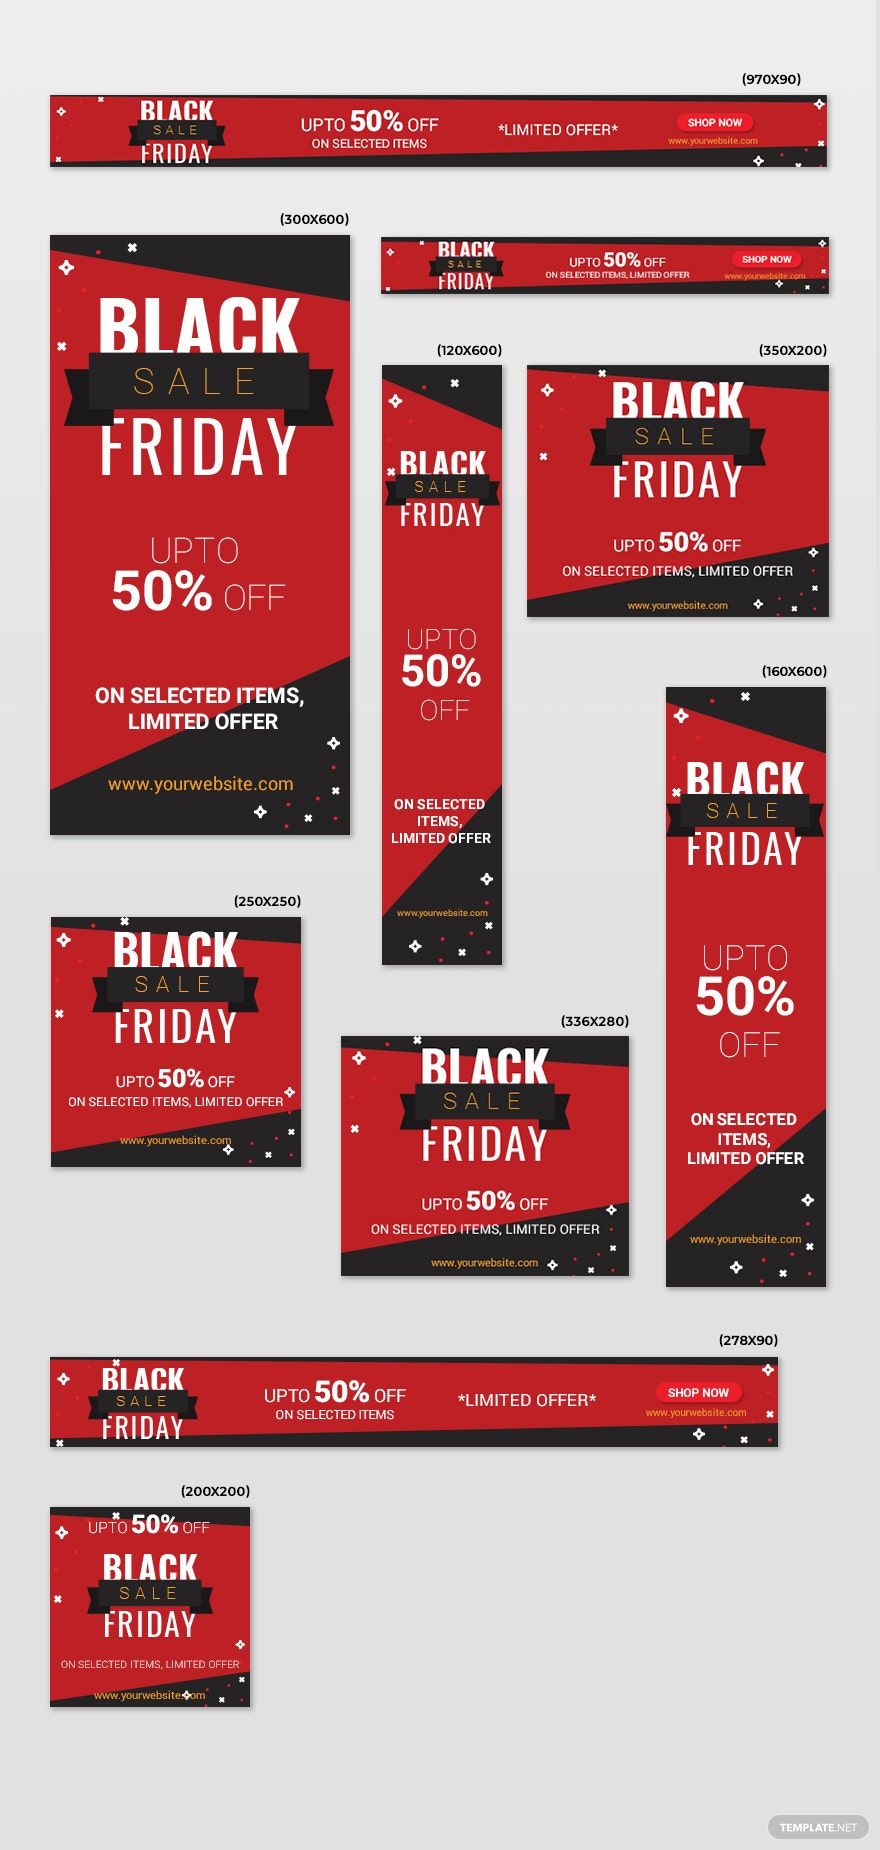 Black Friday AD Template